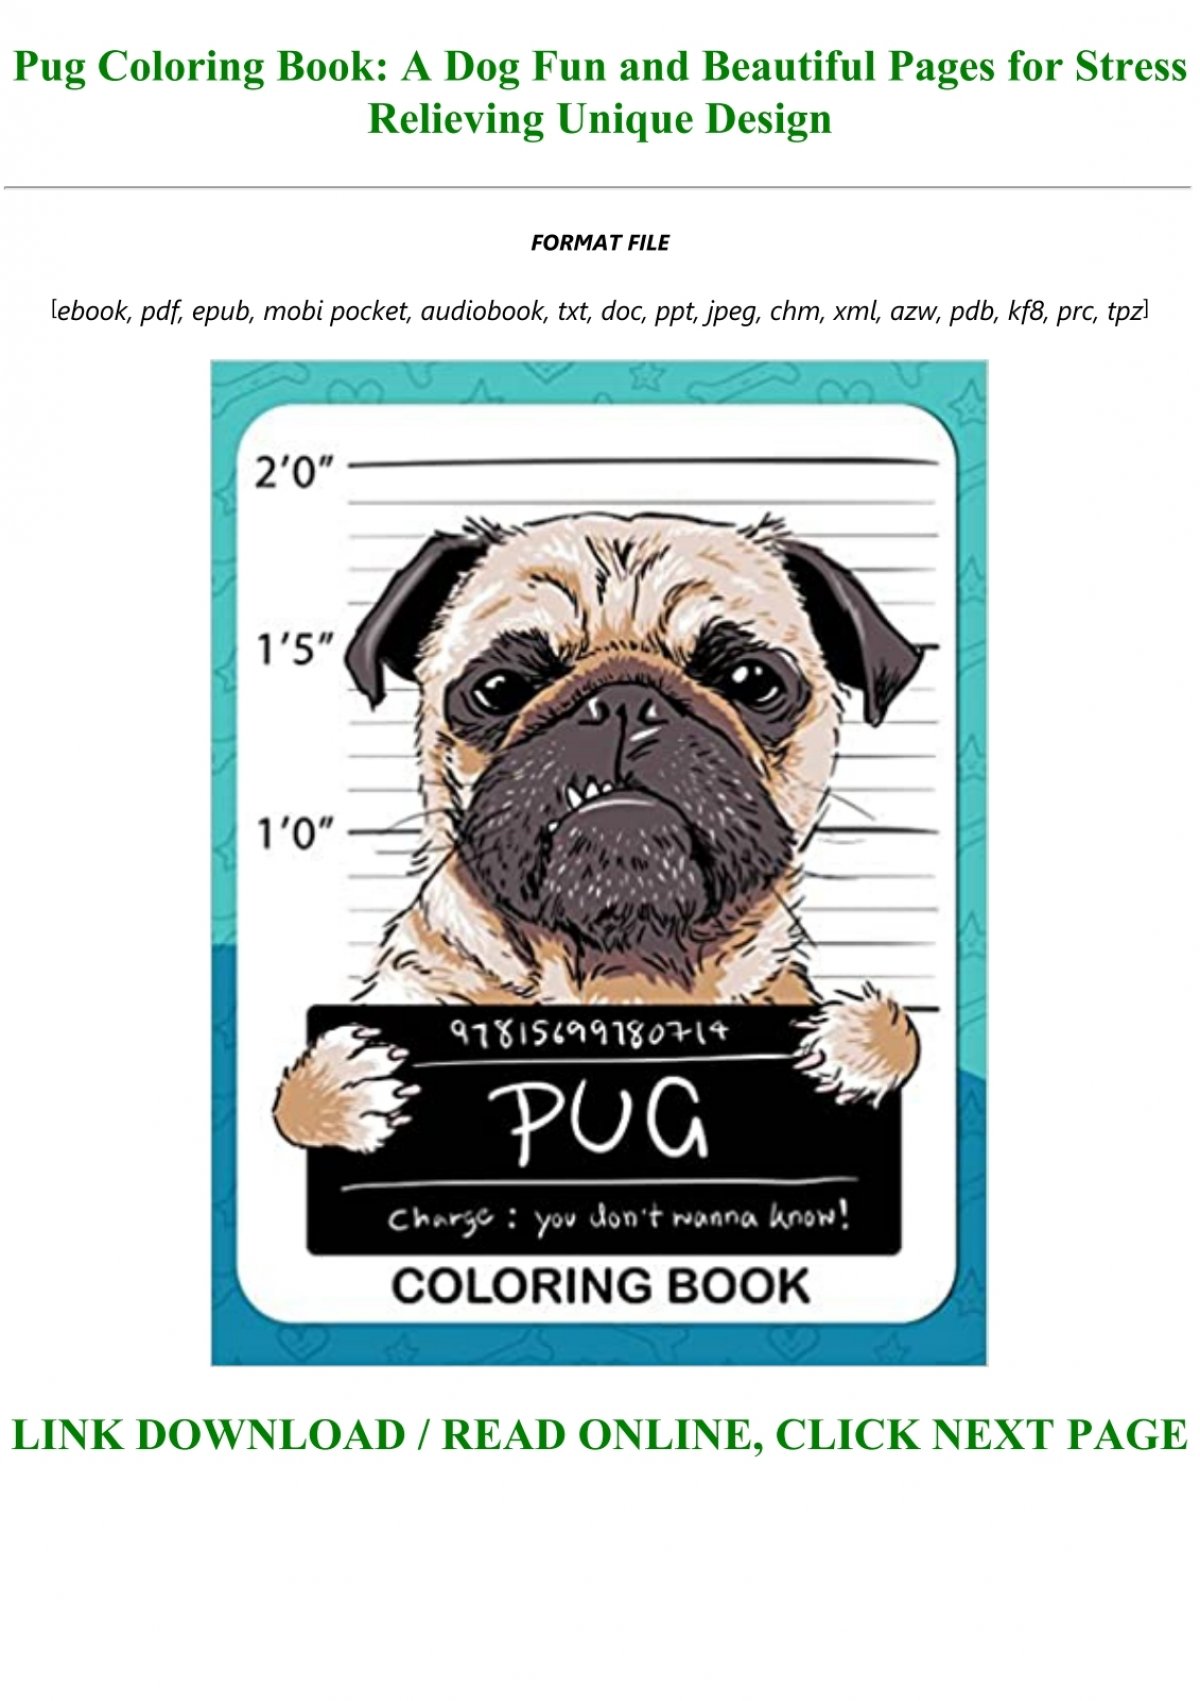 Download Pug Coloring Book A Dog Fun And Beautiful Pages For Stress Relieving Unique Design Full Pdf Online